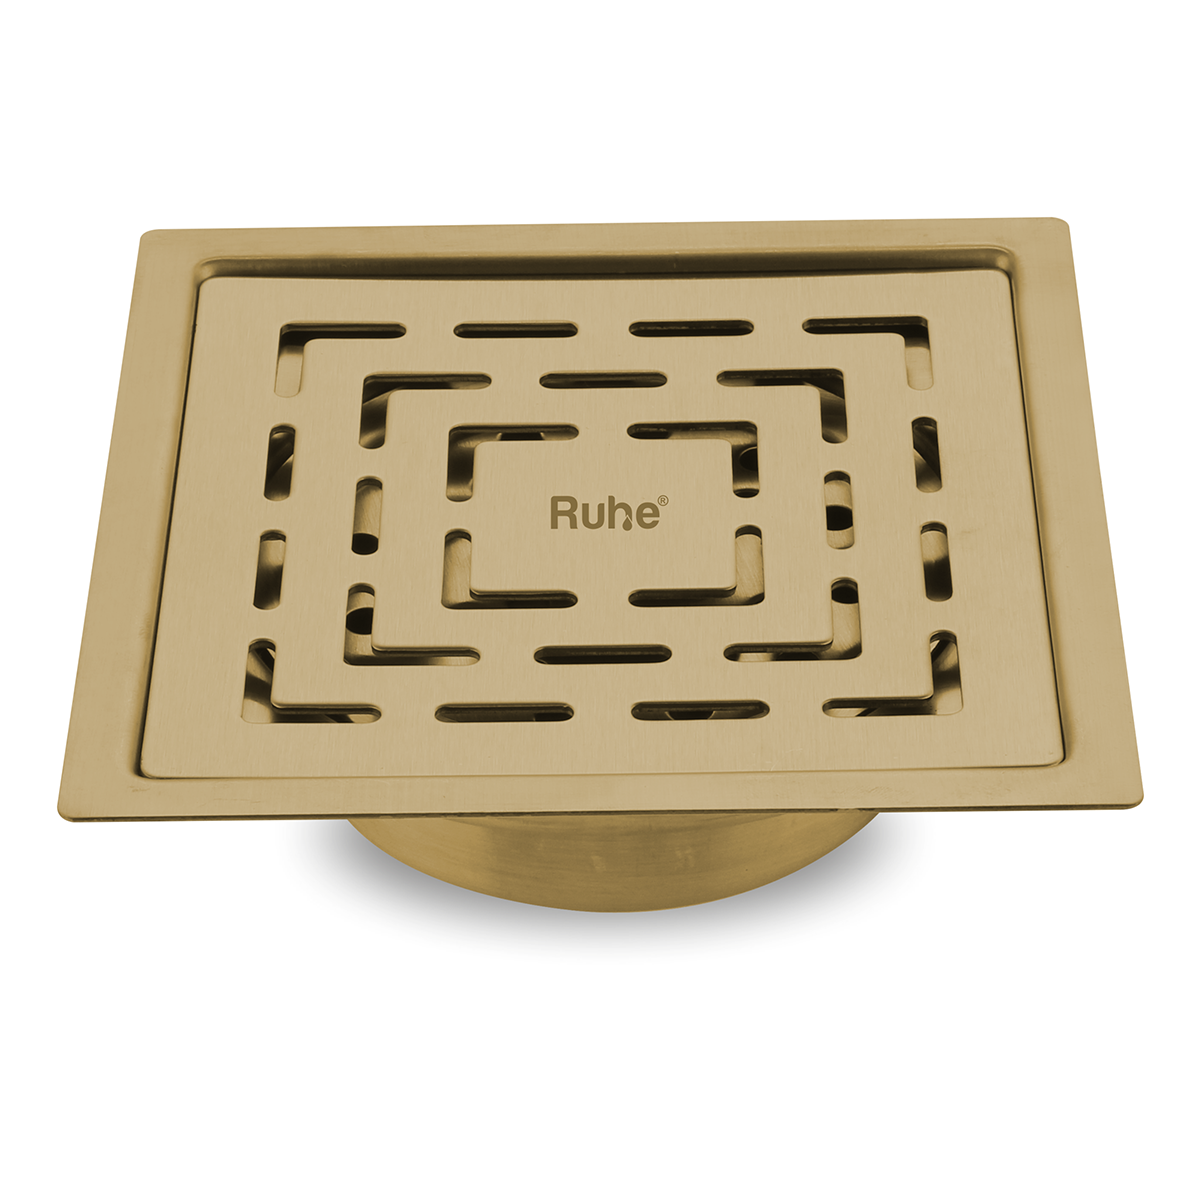 Sapphire Square Flat Cut Floor Drain in Yellow Gold PVD Coating (6 x 6 Inches)